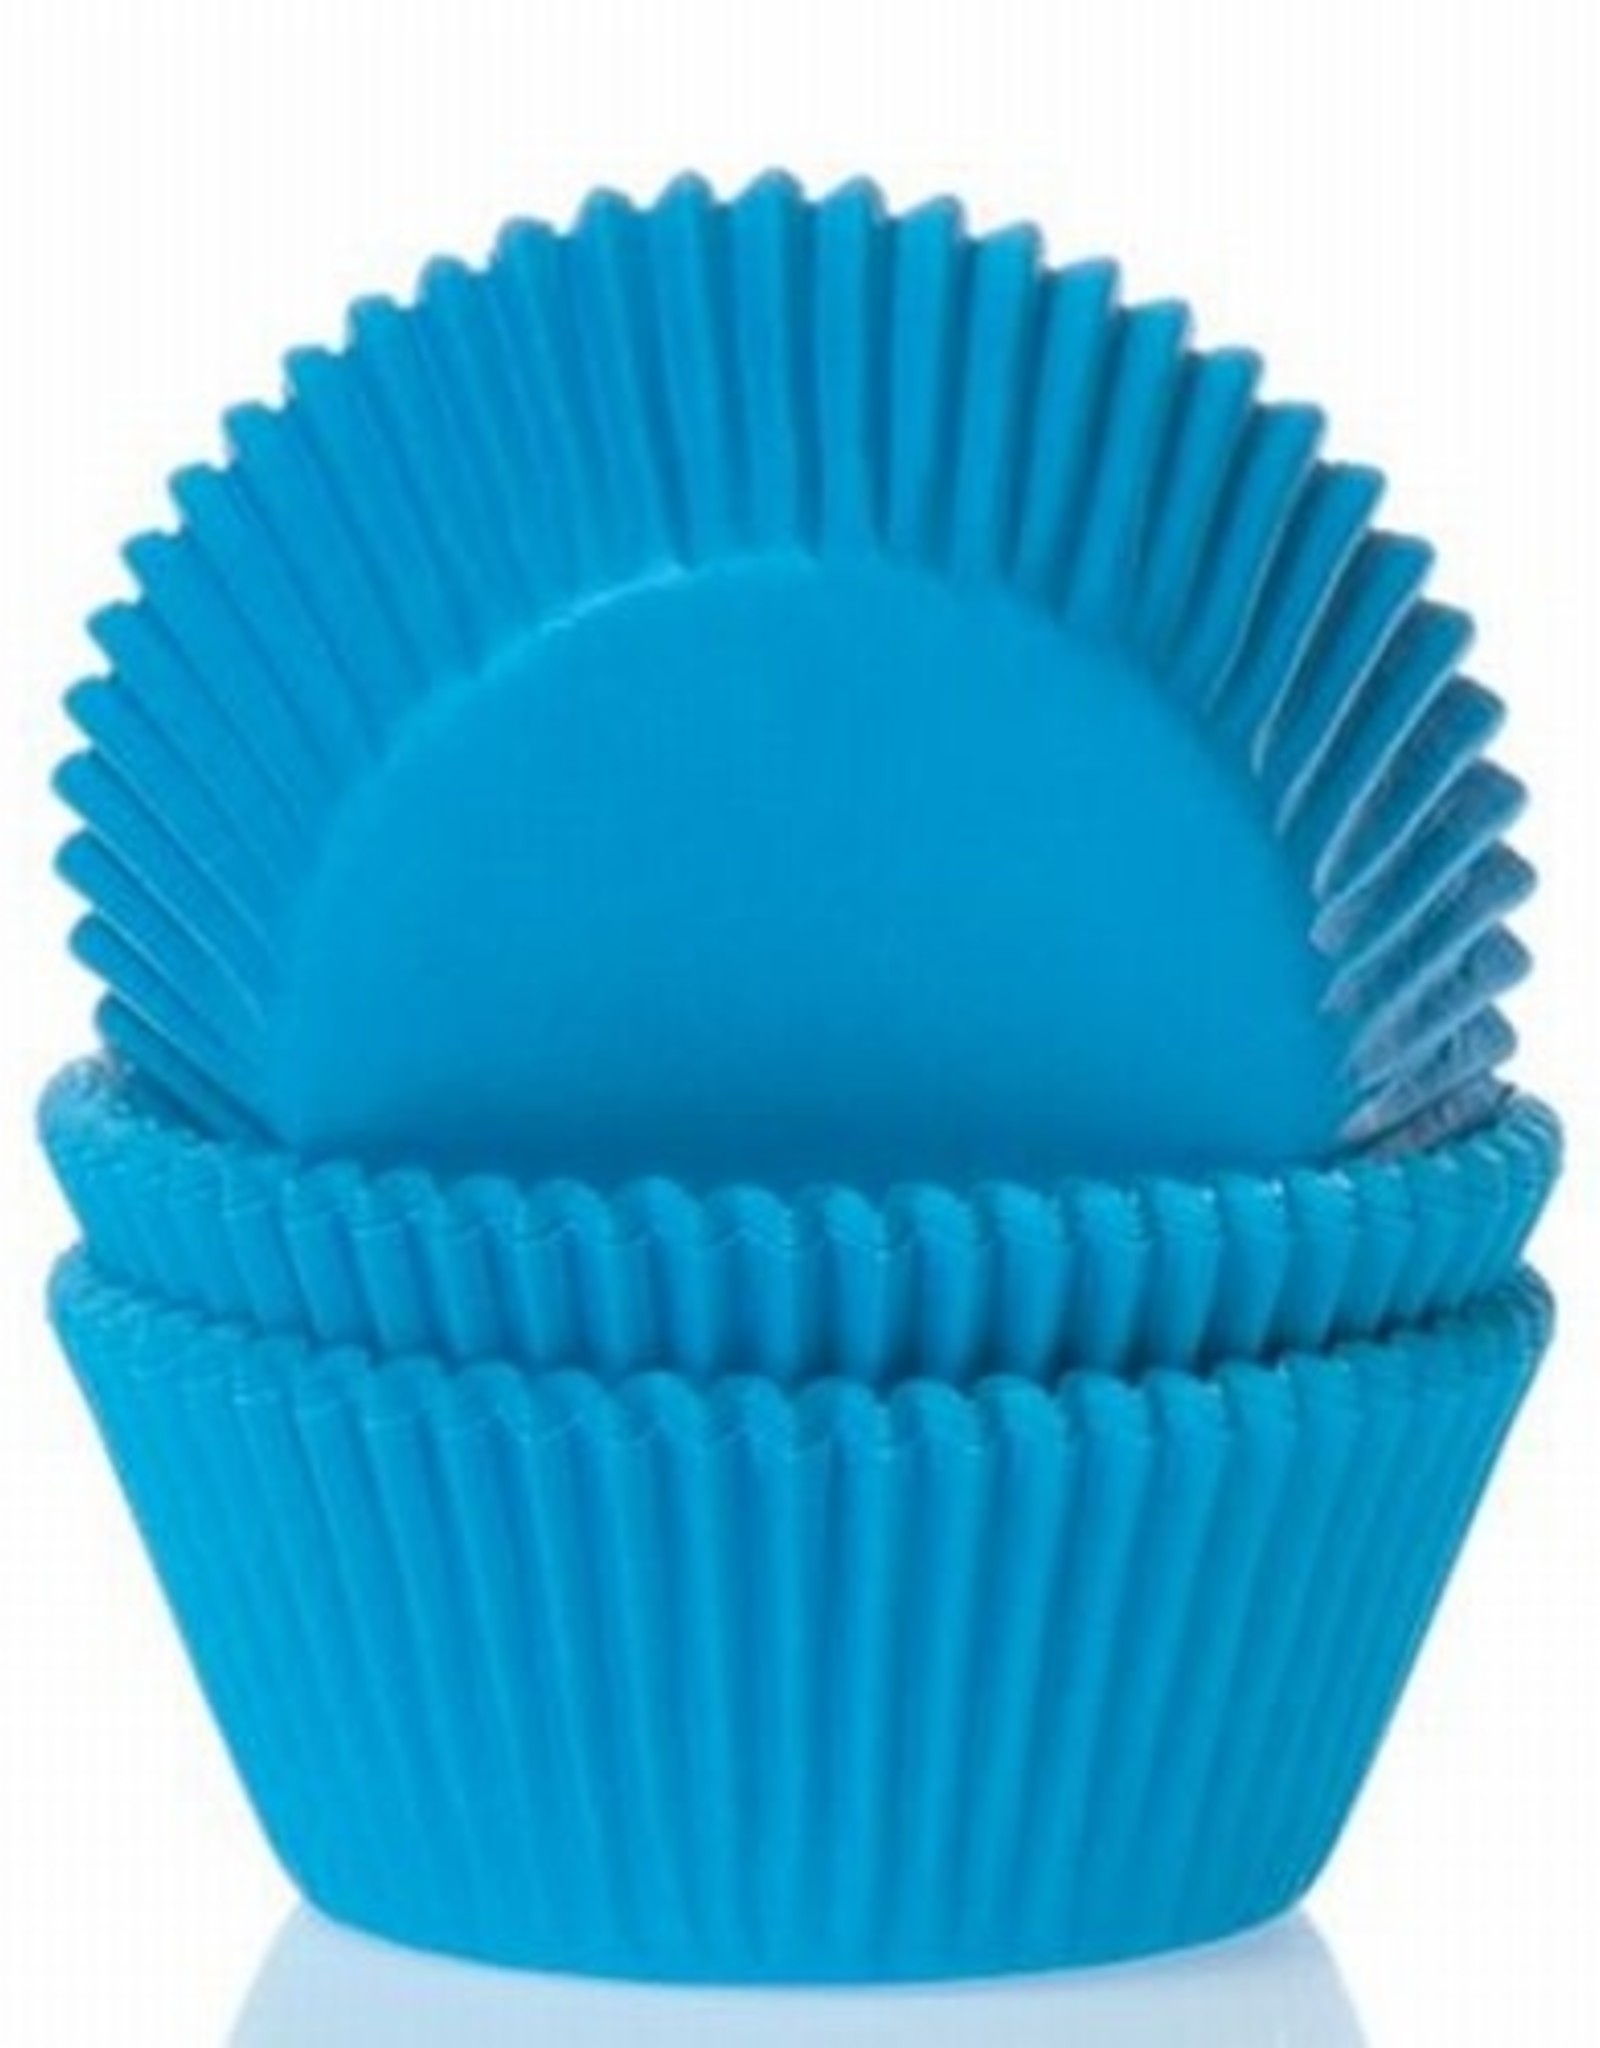 House of Marie House of Marie Mini Baking Cups Cyaan Blauw pk/60